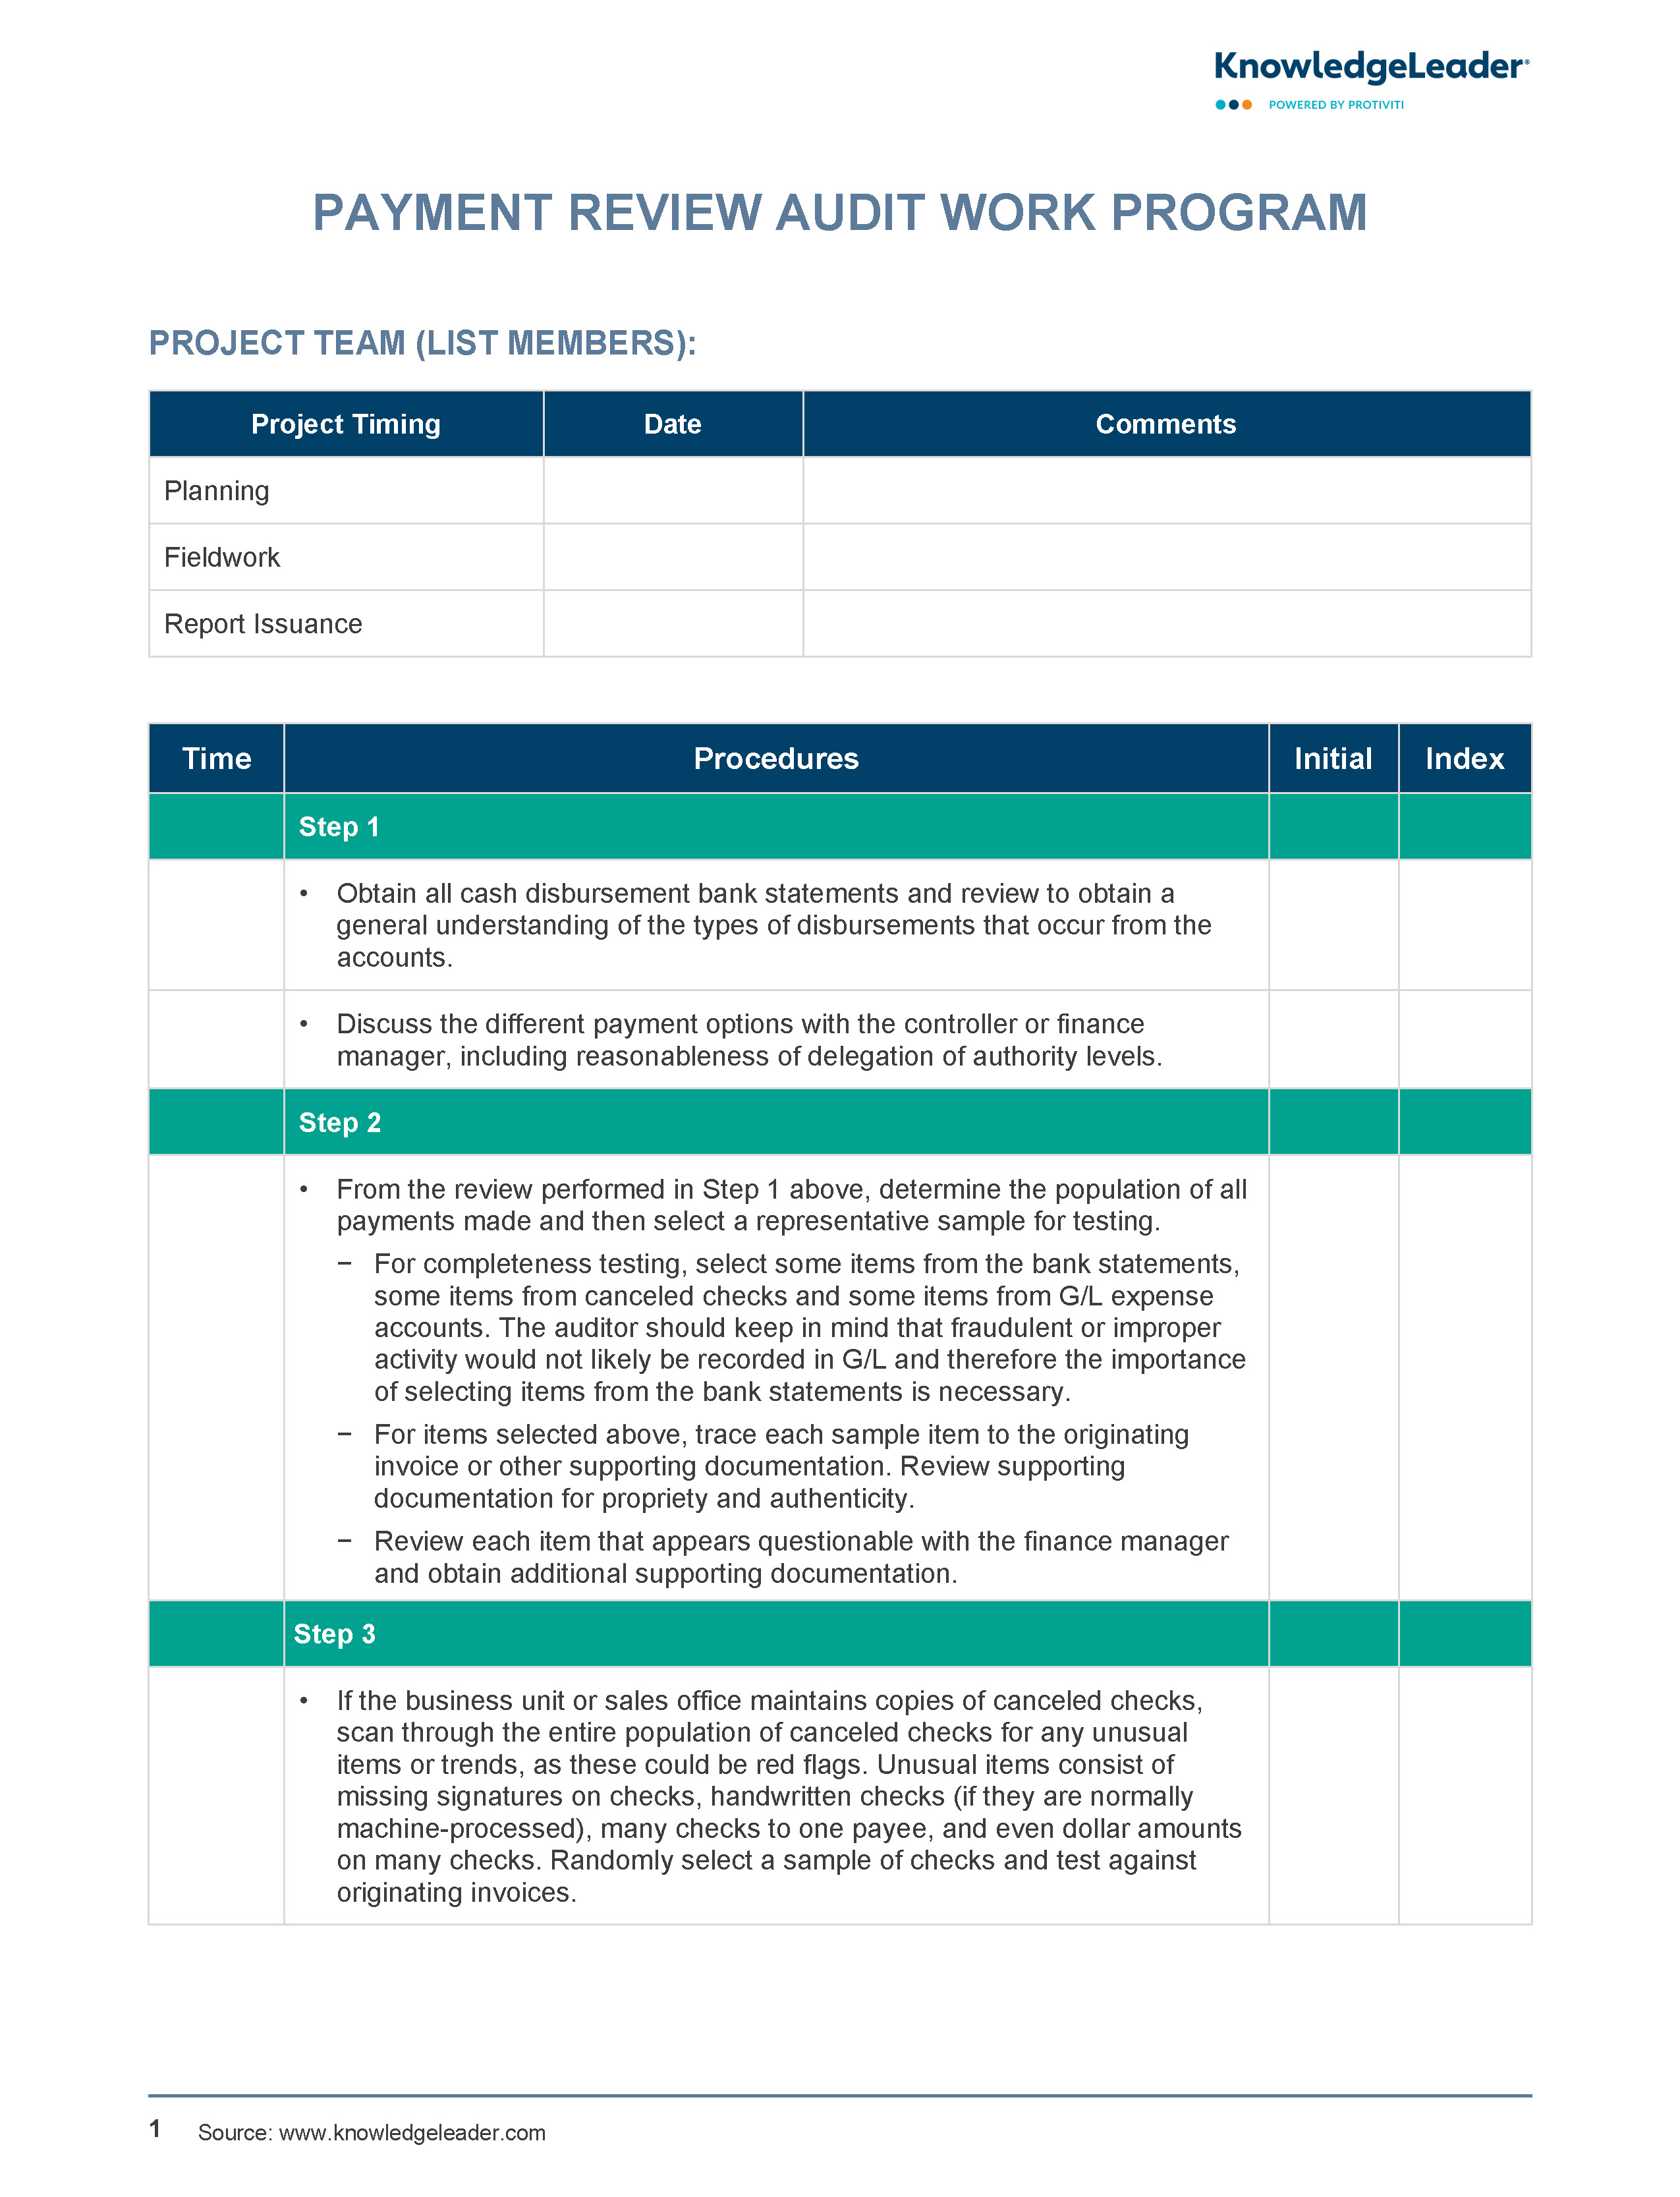 Screenshot of the first page of Payment Review Work Program